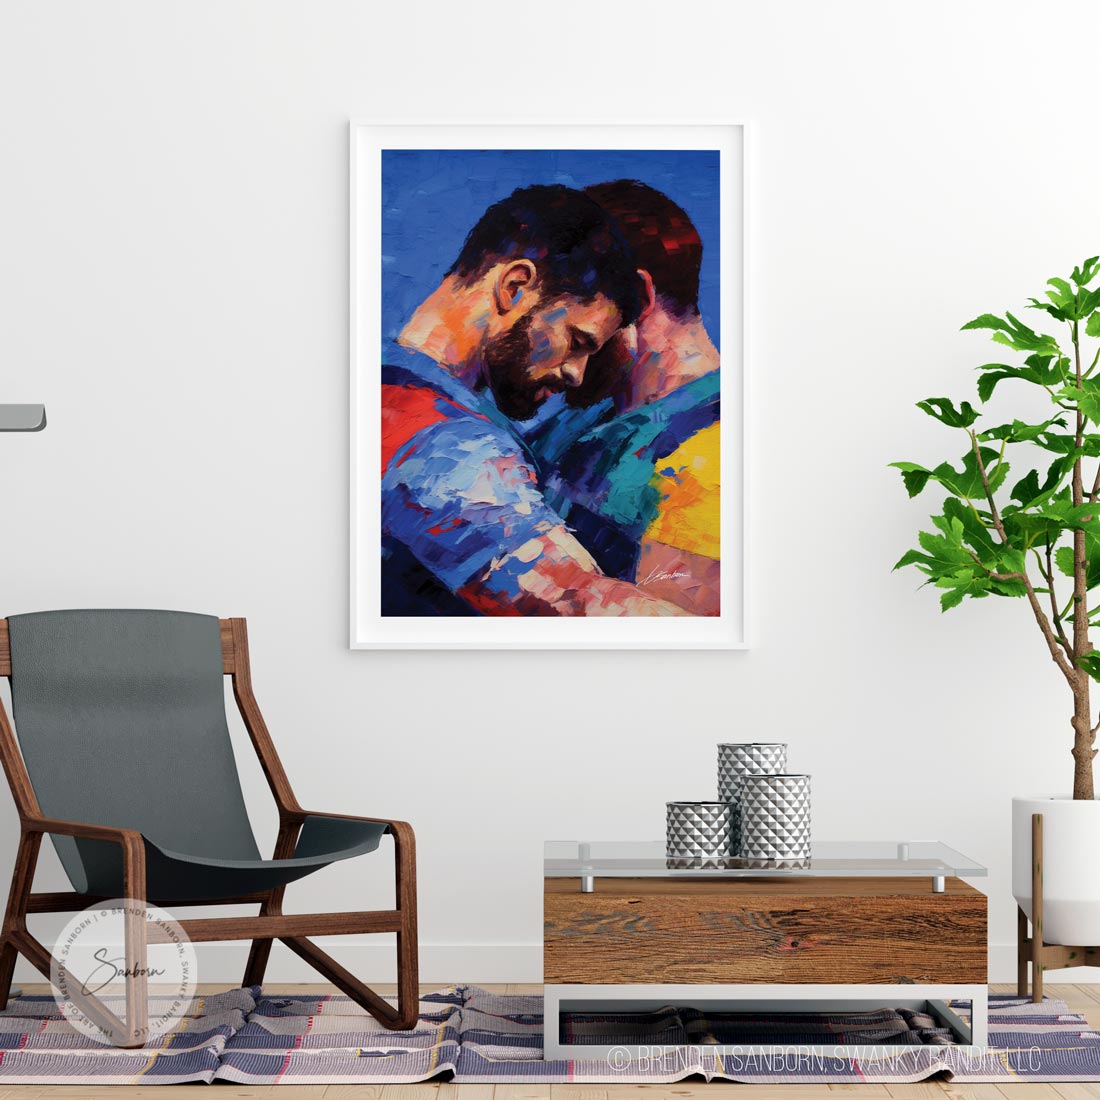 Consoling Arms - Oil Painting of Gay Lovers in a Supportive Embrace - Giclee Art Print